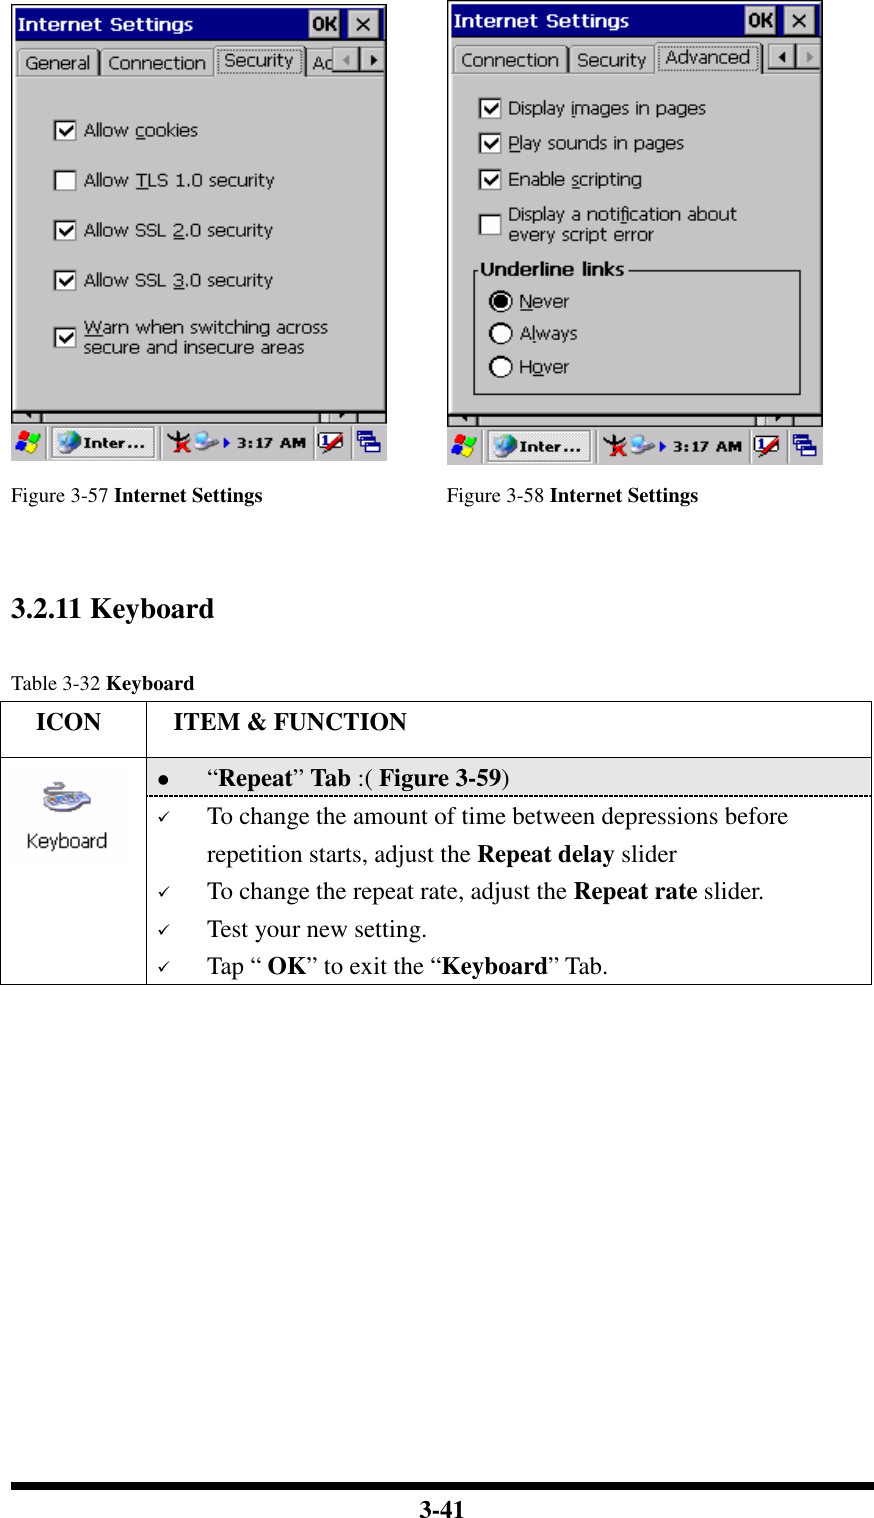  3-41   Figure 3-57 Internet Settings Figure 3-58 Internet Settings   3.2.11 Keyboard  Table 3-32 Keyboard     ICON  ITEM &amp; FUNCTION  “Repeat” Tab :( Figure 3-59)    To change the amount of time between depressions before repetition starts, adjust the Repeat delay slider  To change the repeat rate, adjust the Repeat rate slider.  Test your new setting.  Tap “ OK” to exit the “Keyboard” Tab. 